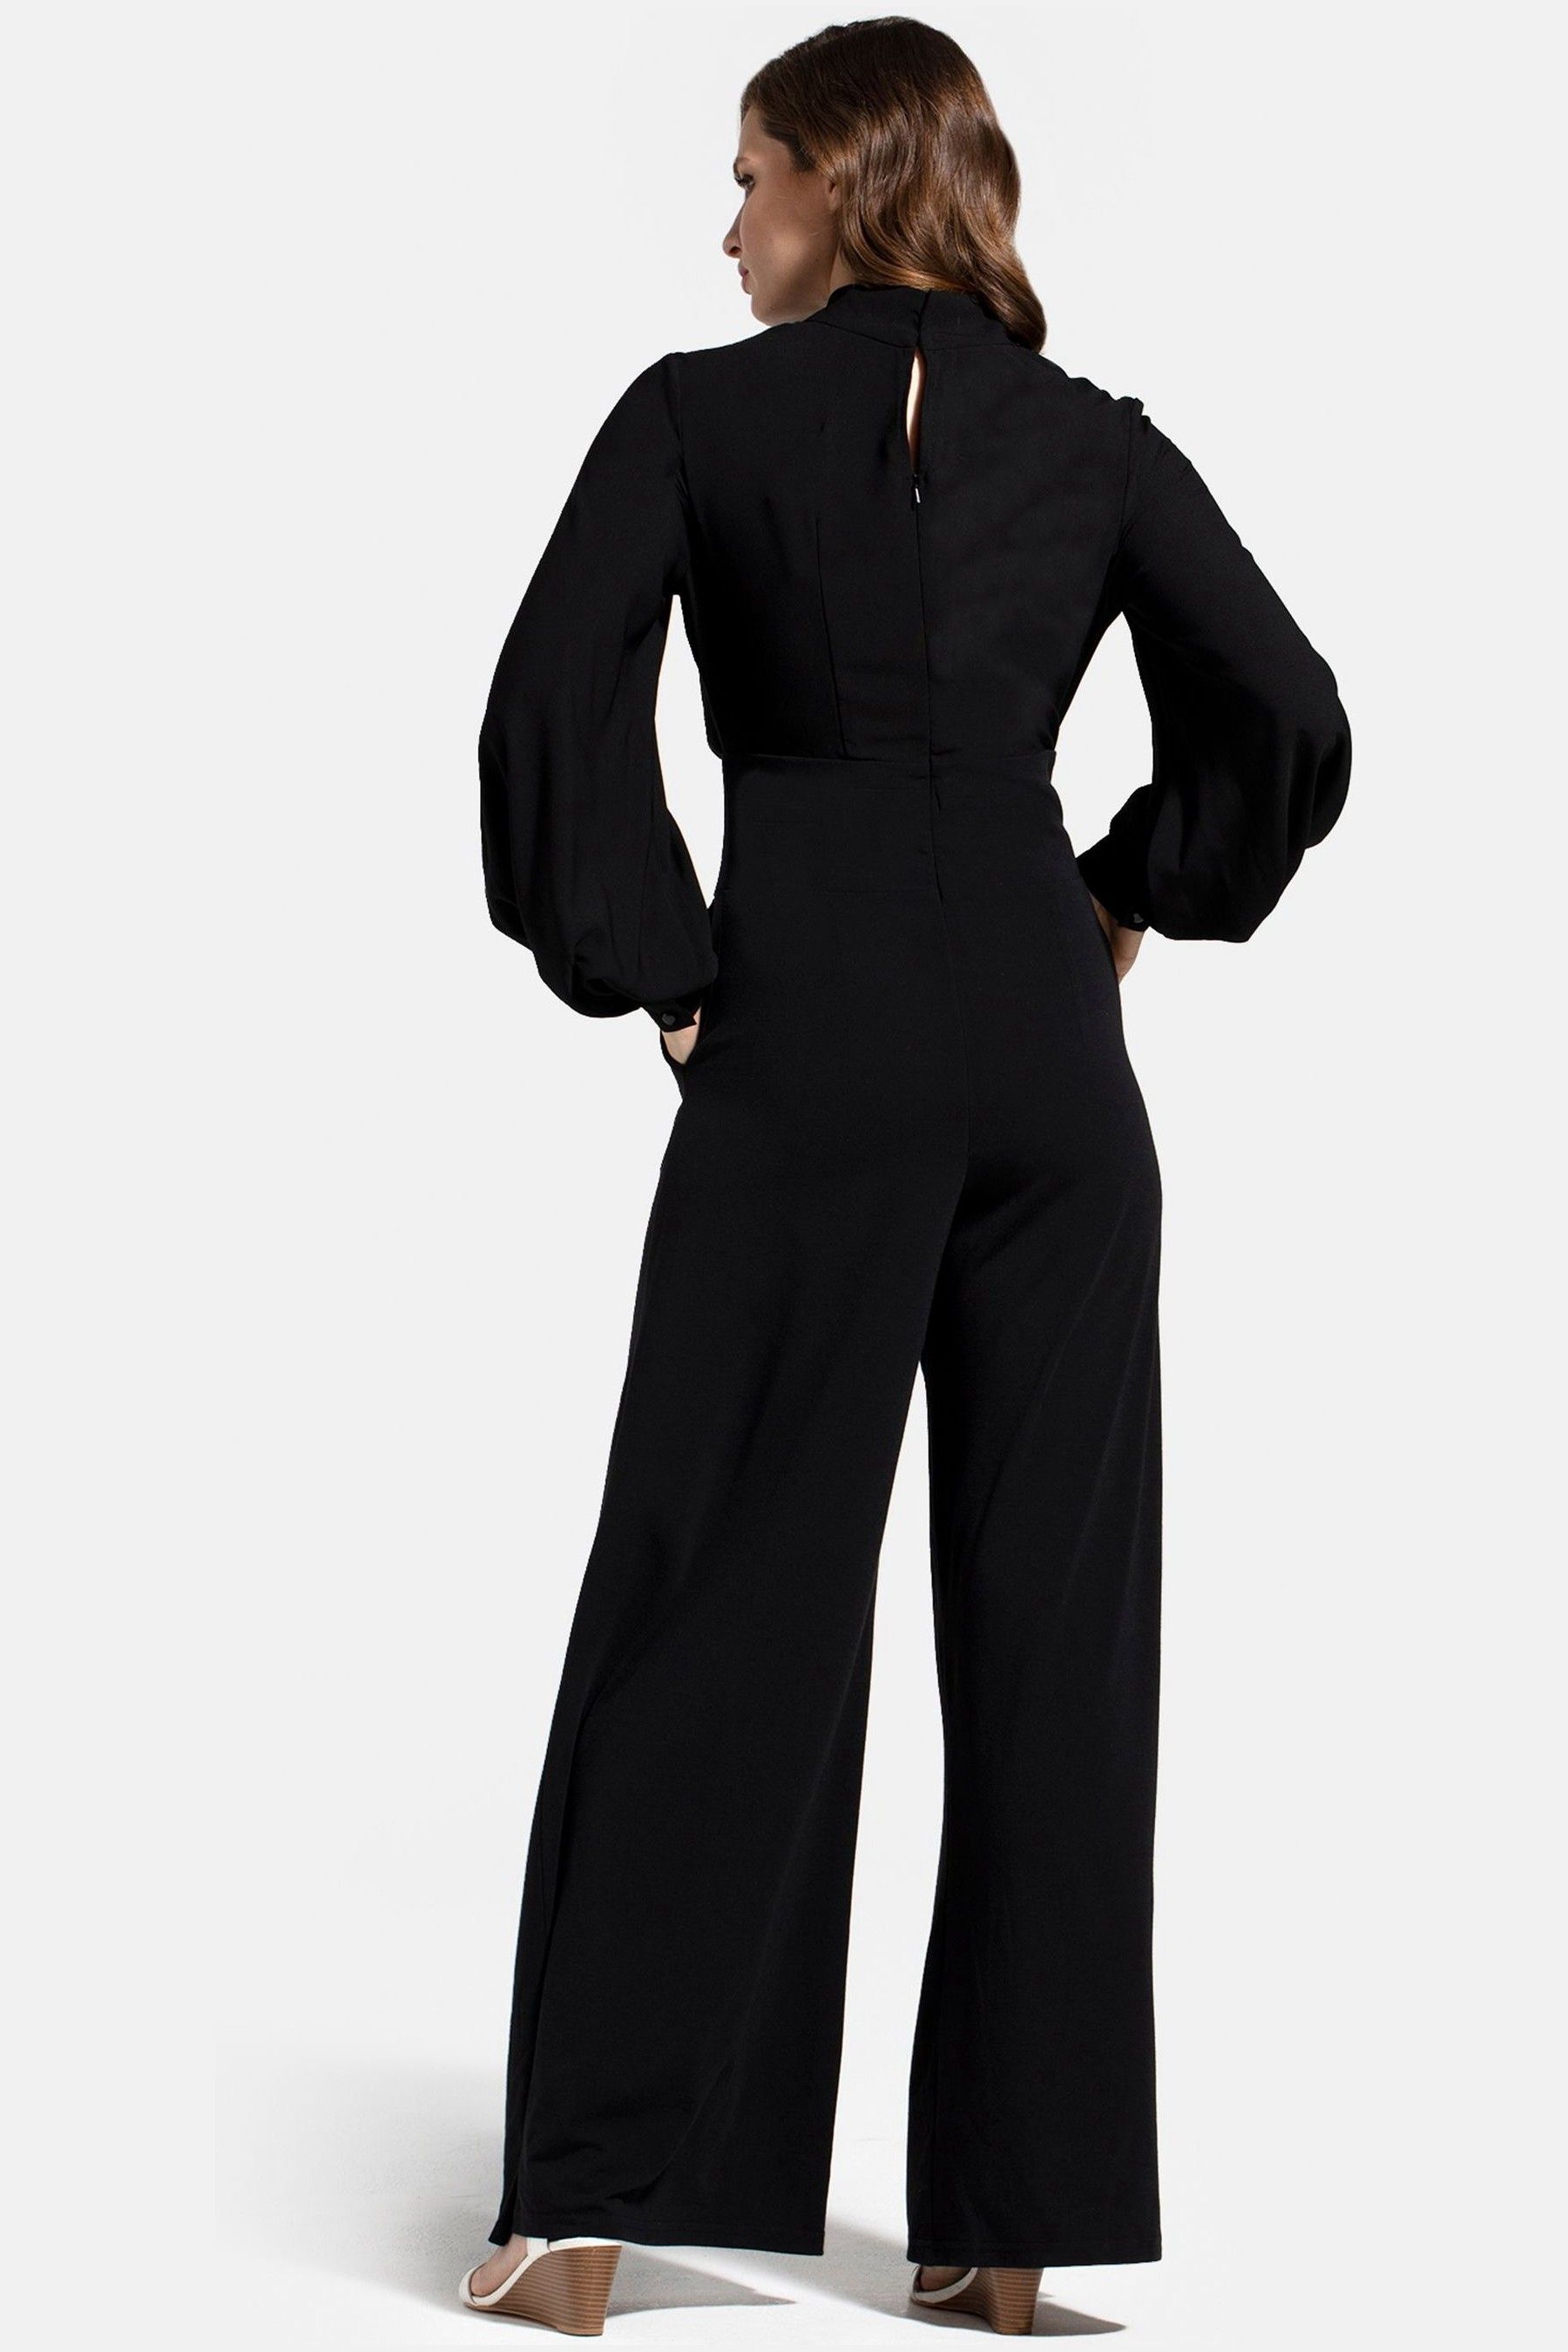 Buy Hotsquash Wide Leg Jumpsuit With Blouson Sleeve From The Next Uk Online Shop